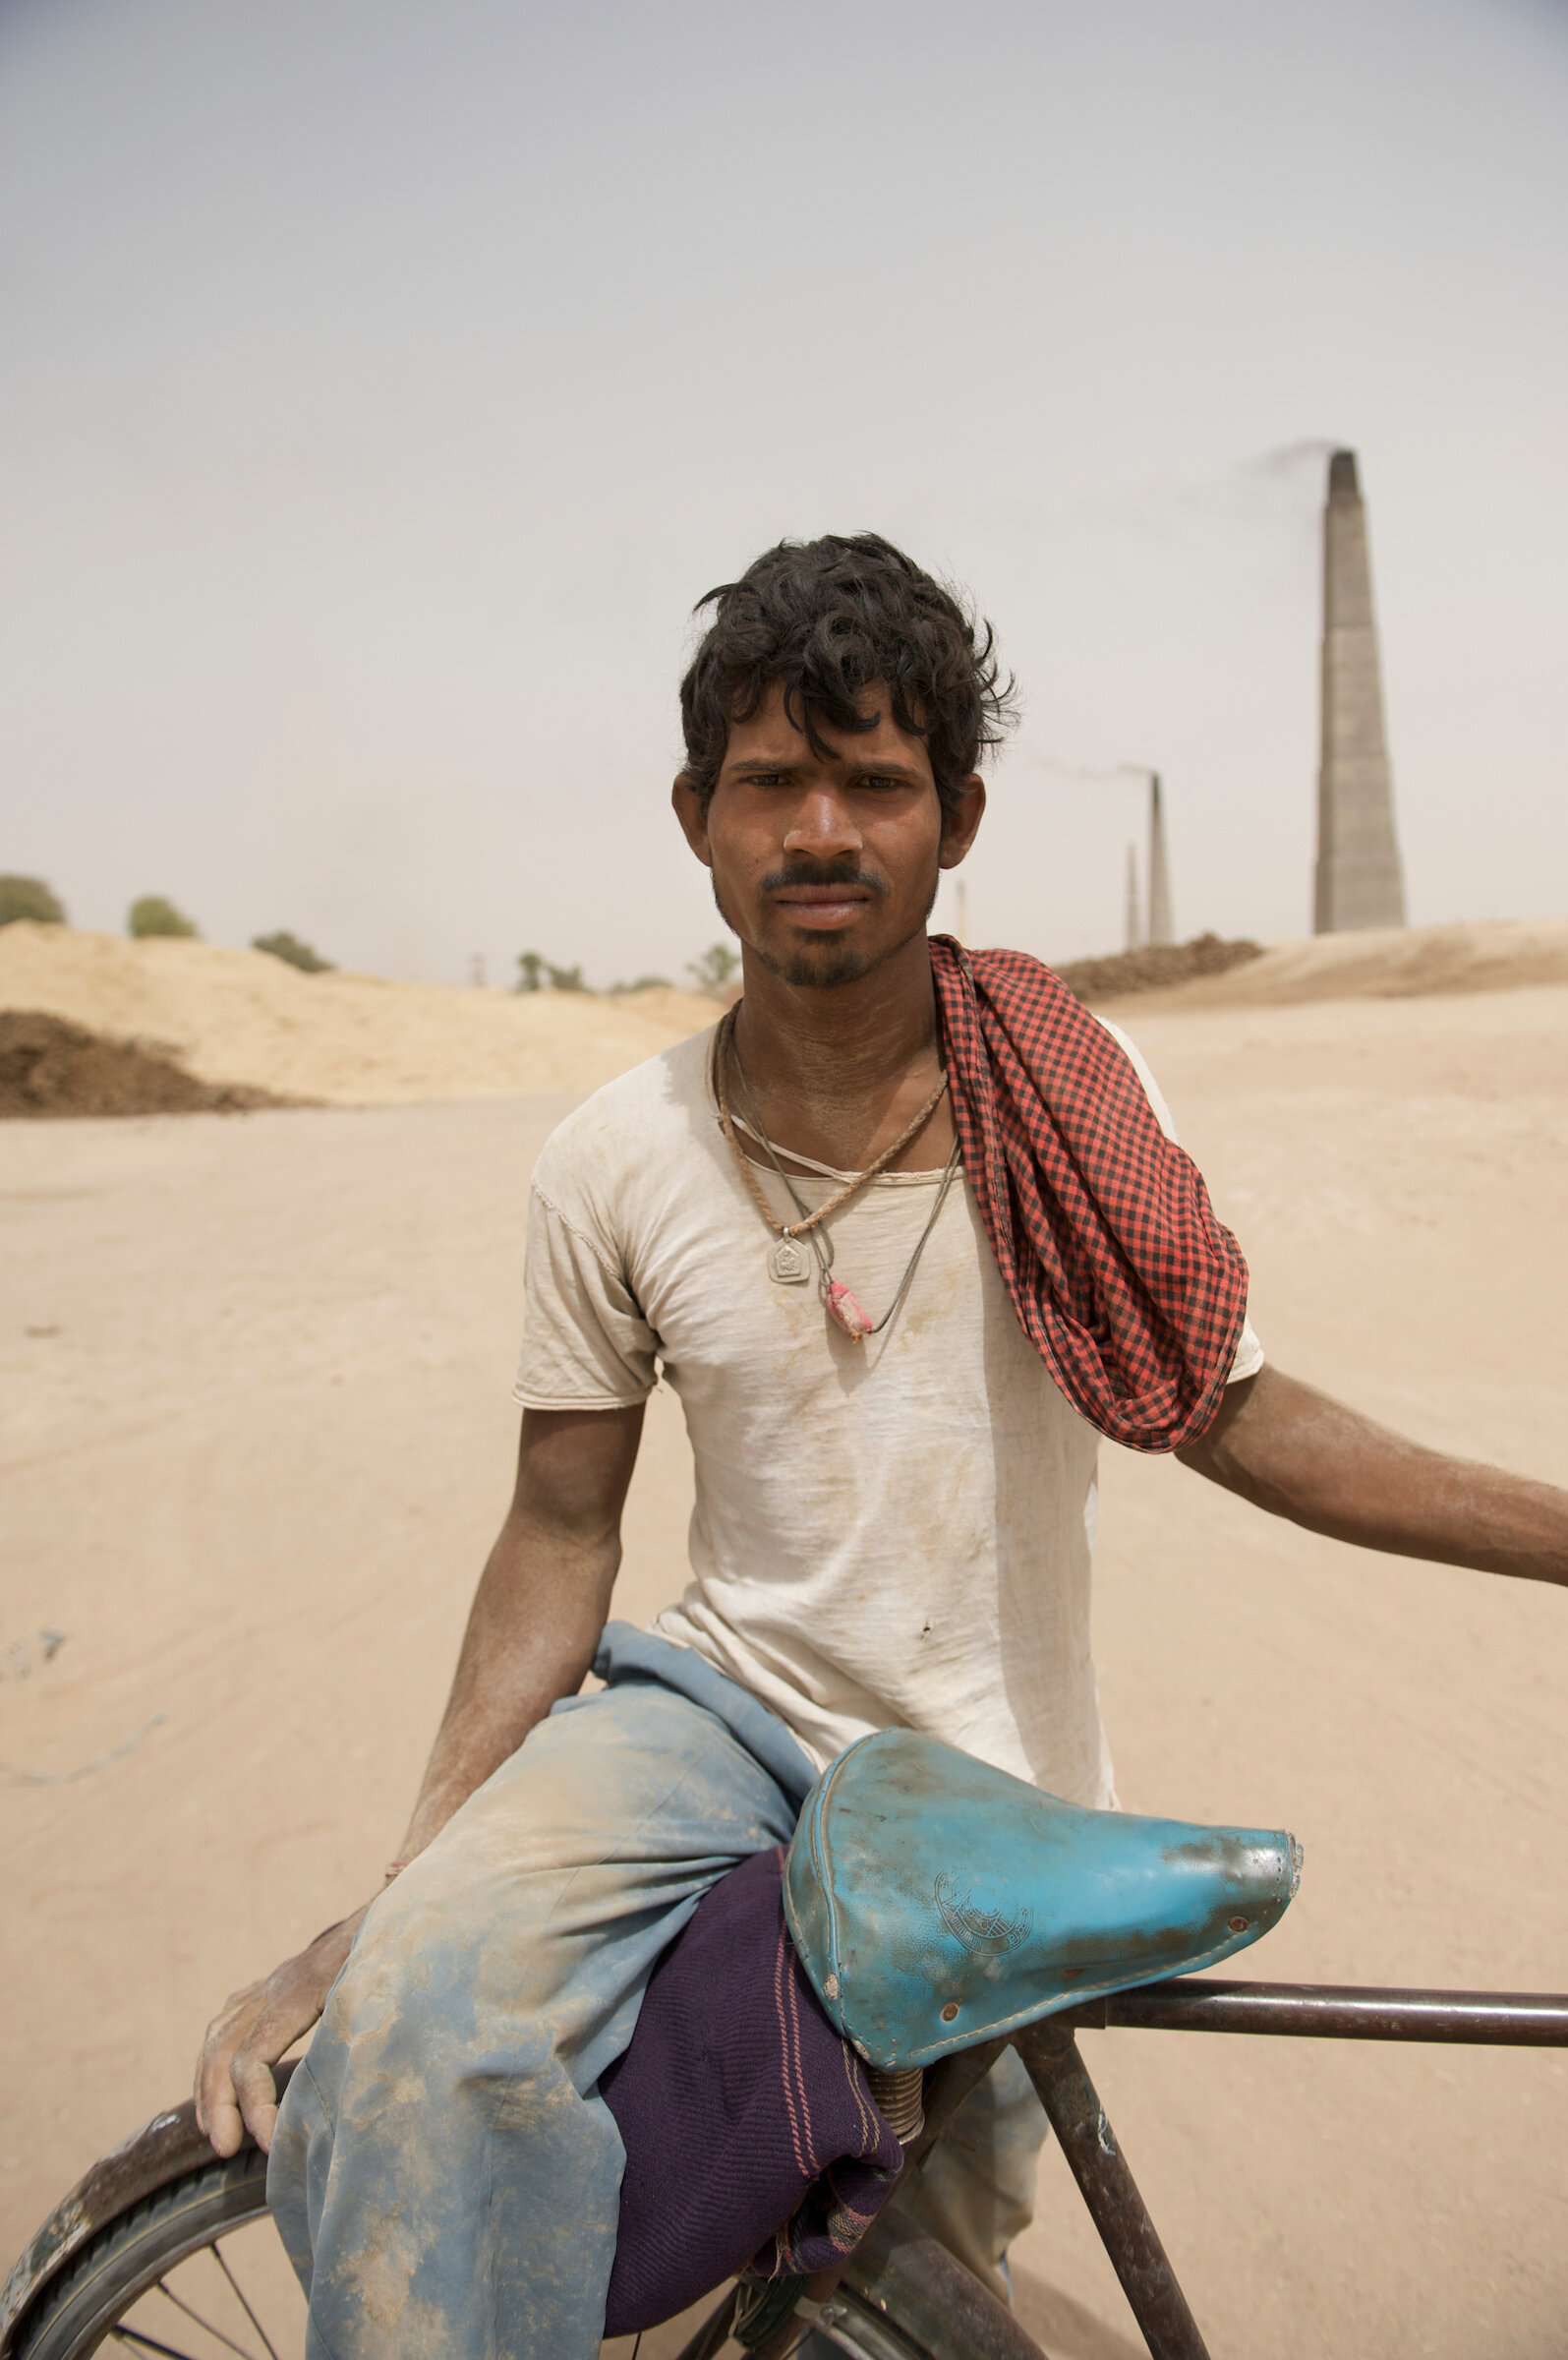  Untouchable caste brick maker - Rajasthan, India (please ask for specific location) 